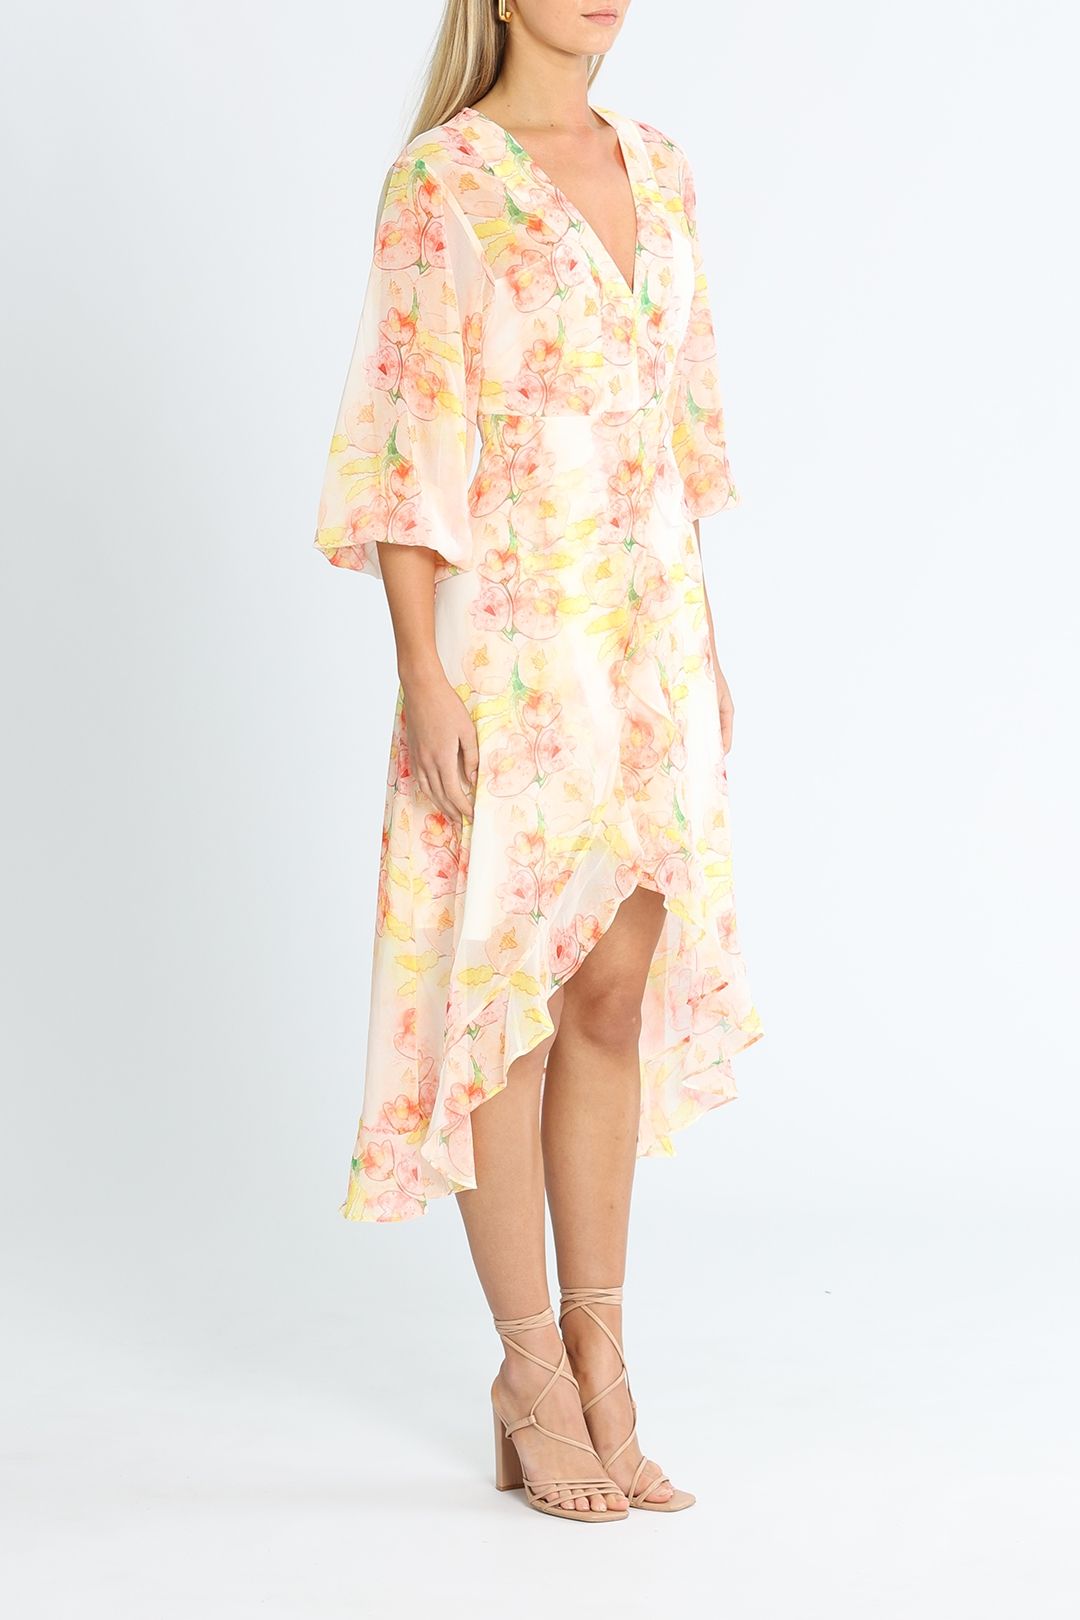 Belle and Bloom Beautiful Escape Dress Floral Ruffles